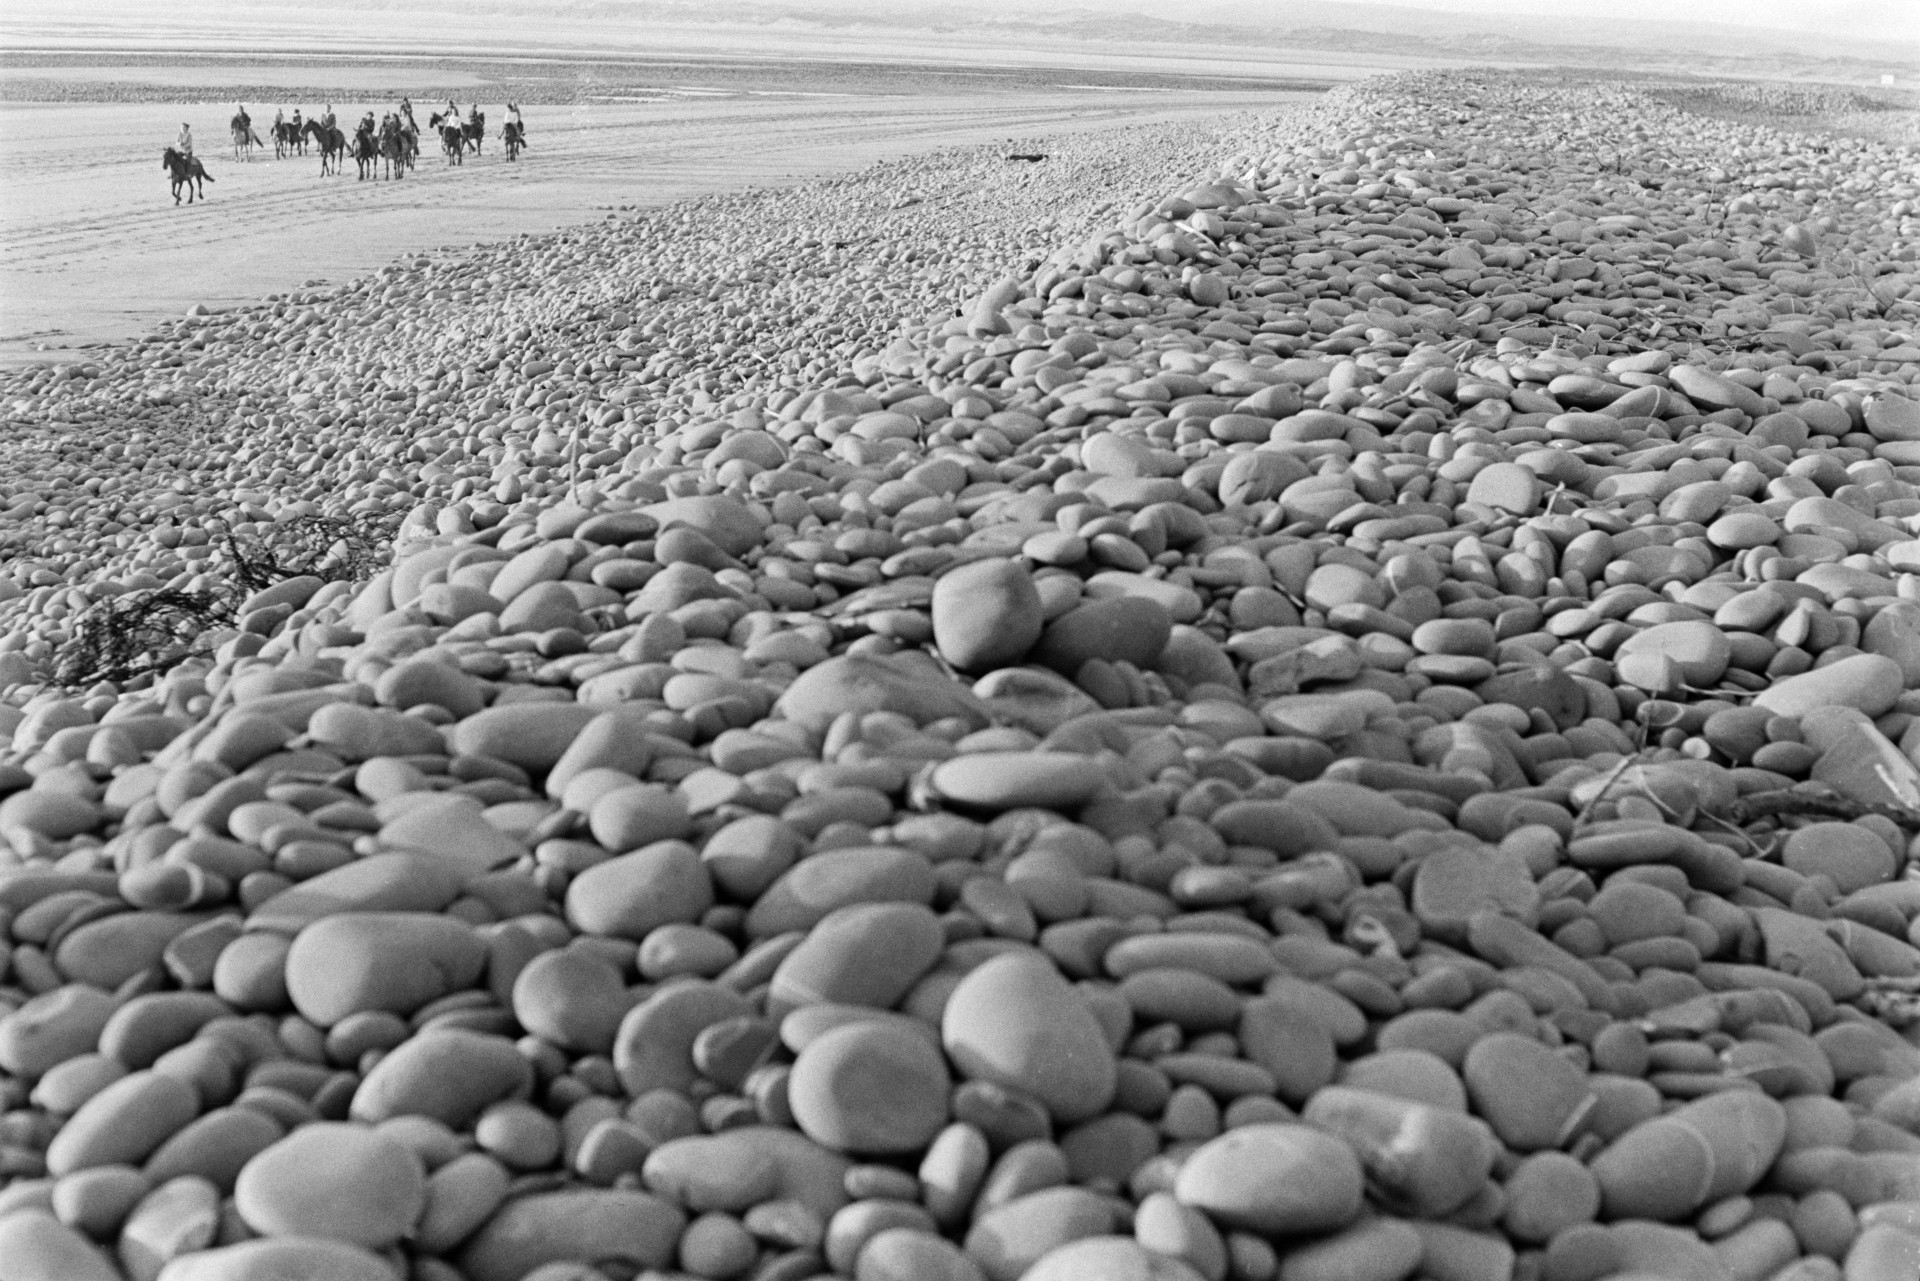 A pebble ridge on the beach at Westward Ho! with horse riders walking along the shoreline in the background.